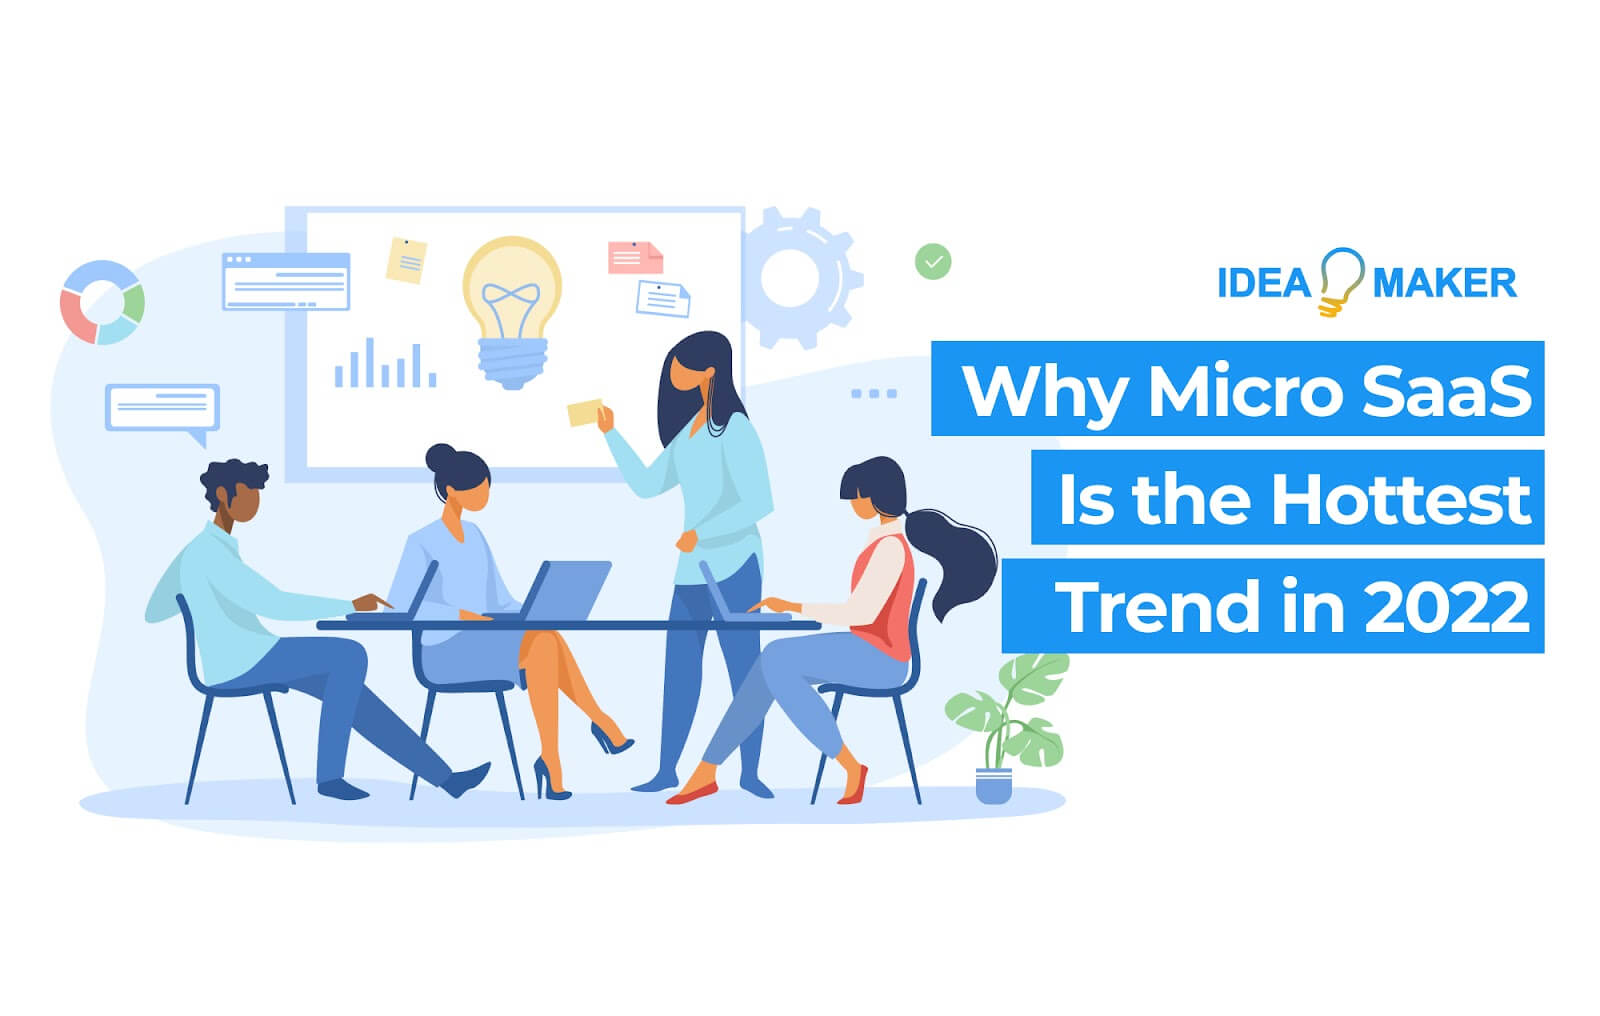 Why Micro SaaS Is the Hottest Trend in 2022